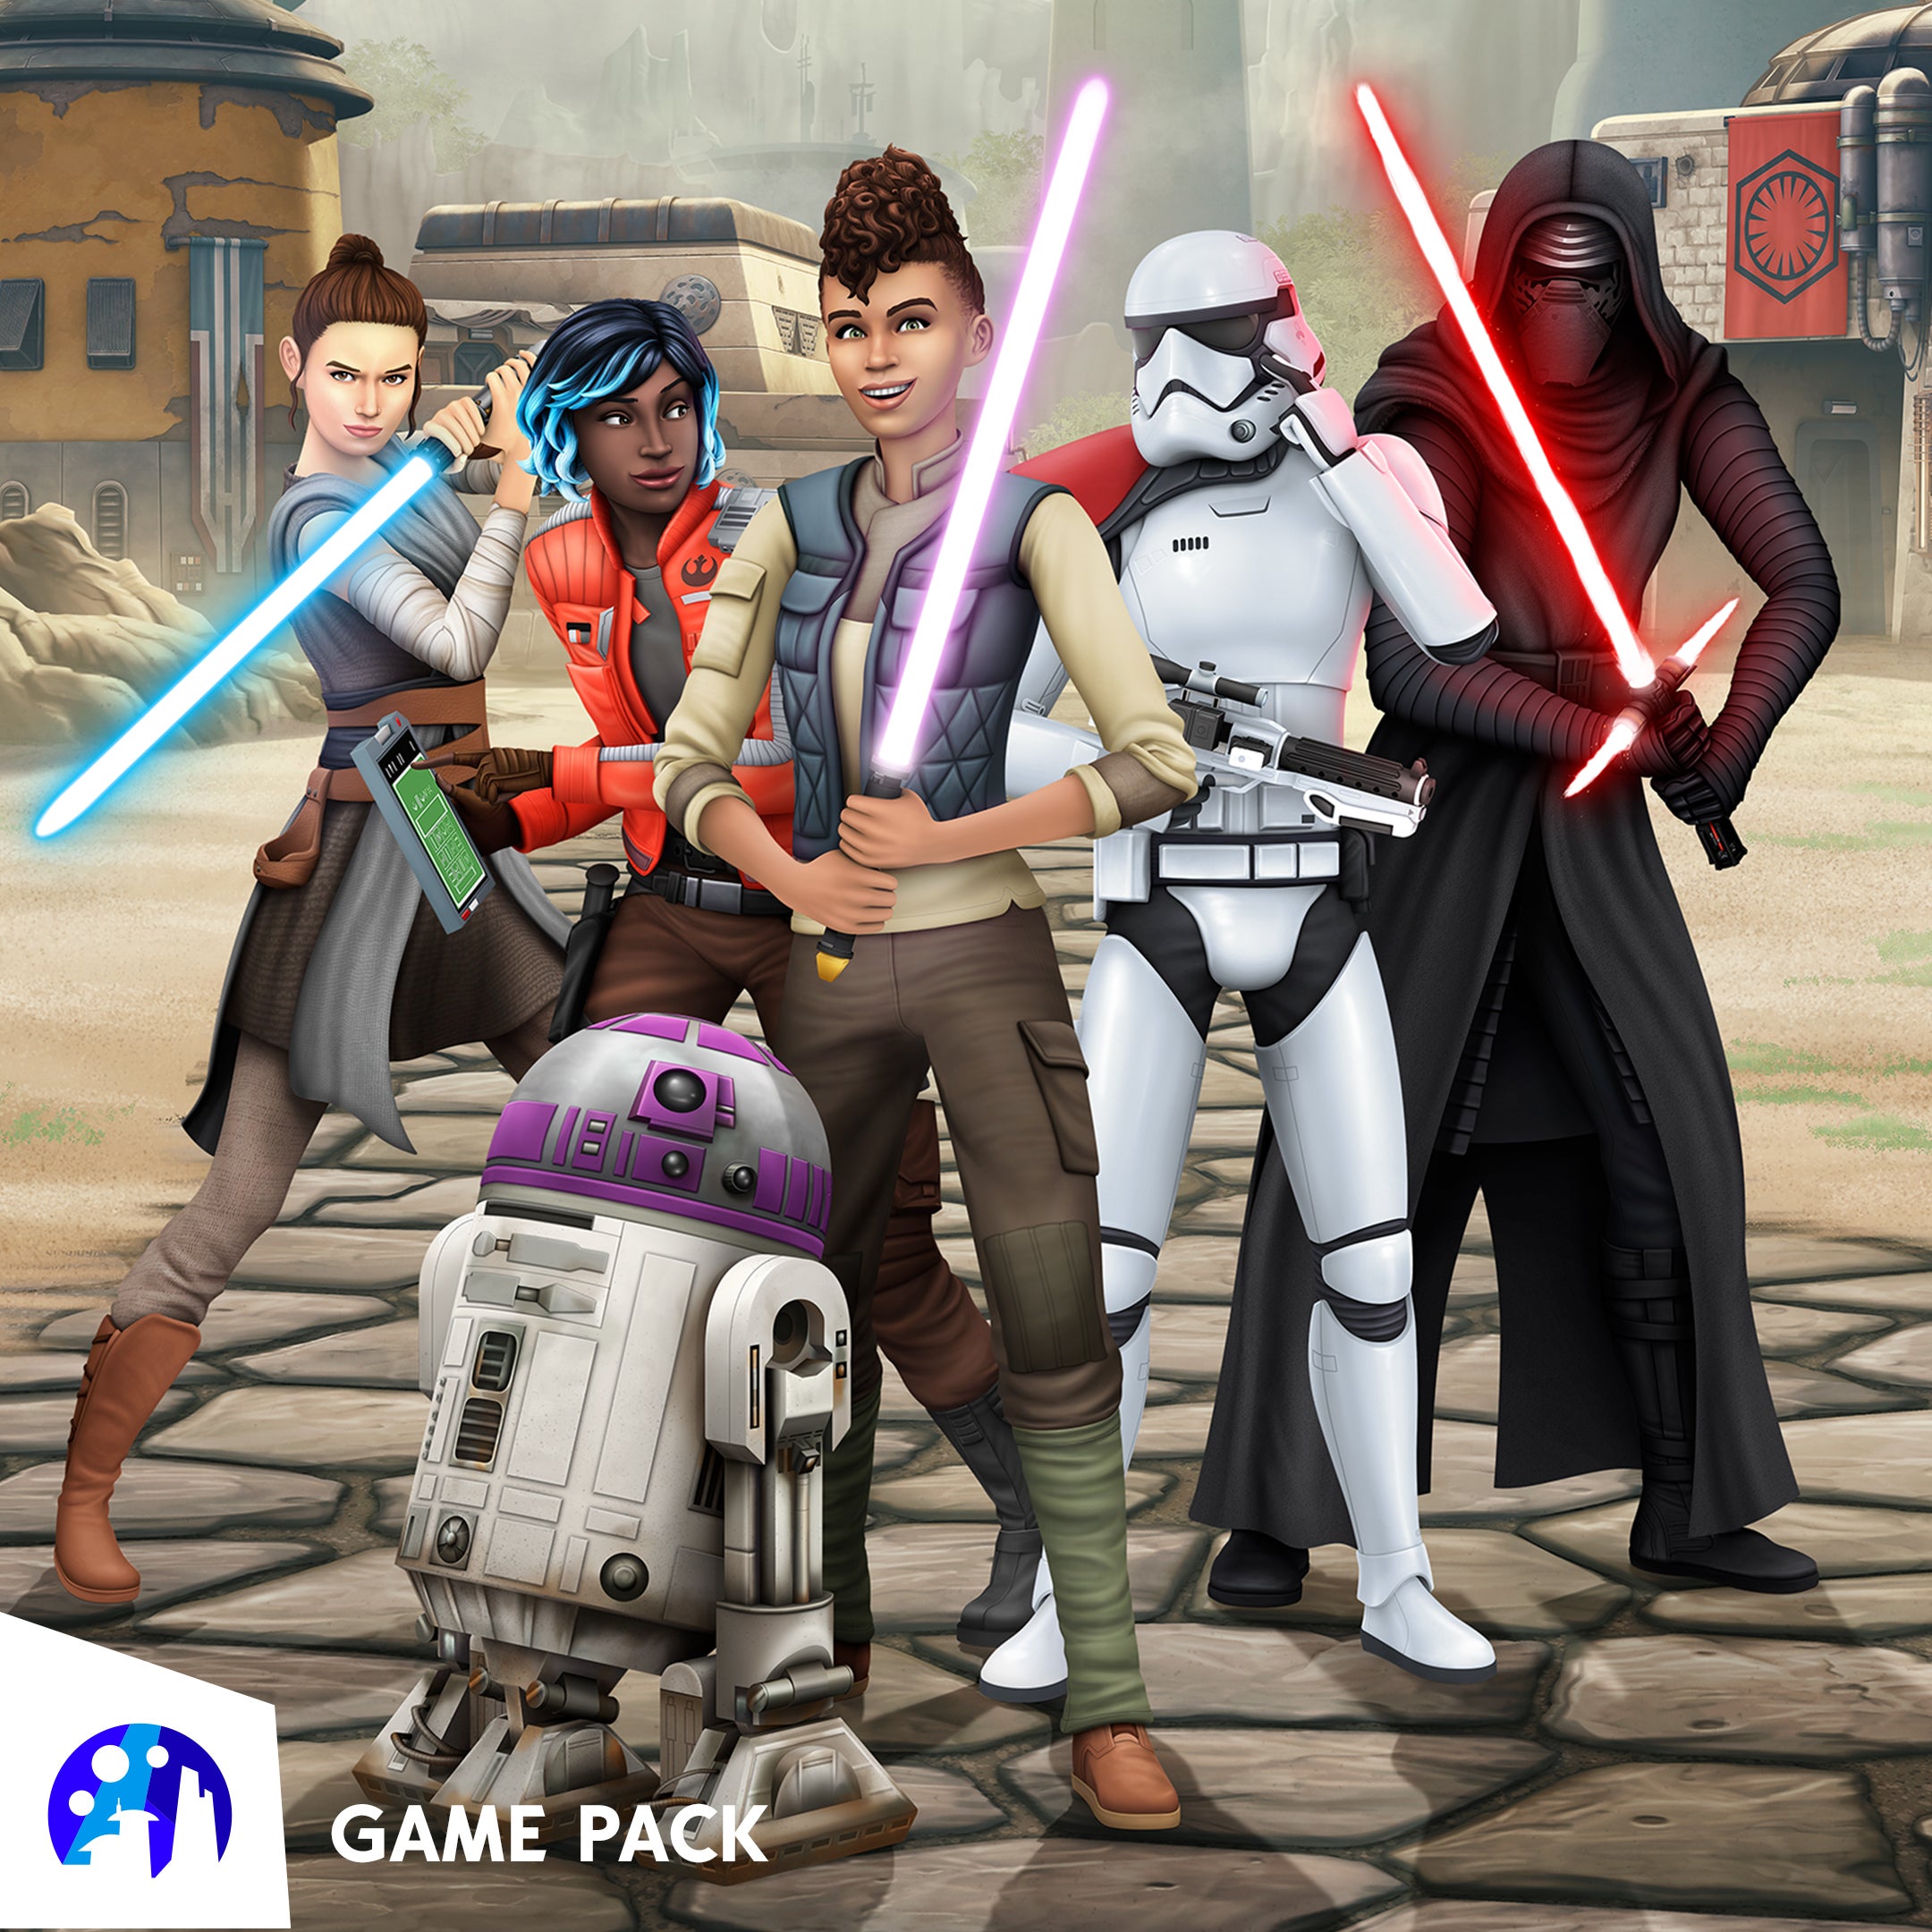 Image for The Sims 4 Star Wars: Journey to Batuu gameplay shows how to create your own Star Wars story